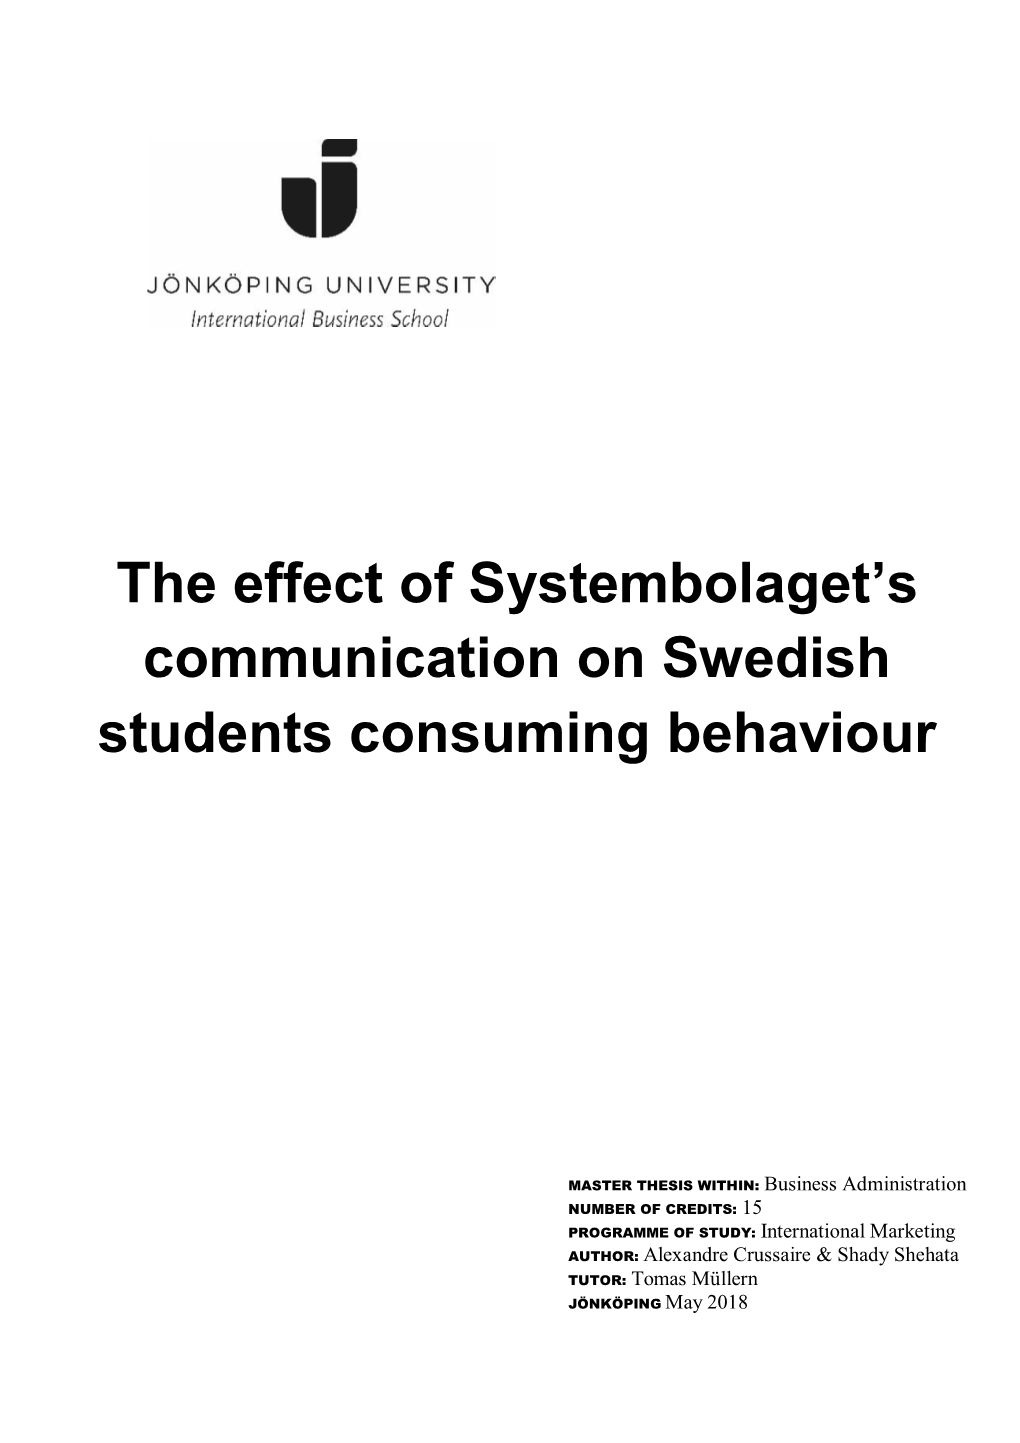 The Effect of Systembolaget's Communication on Swedish